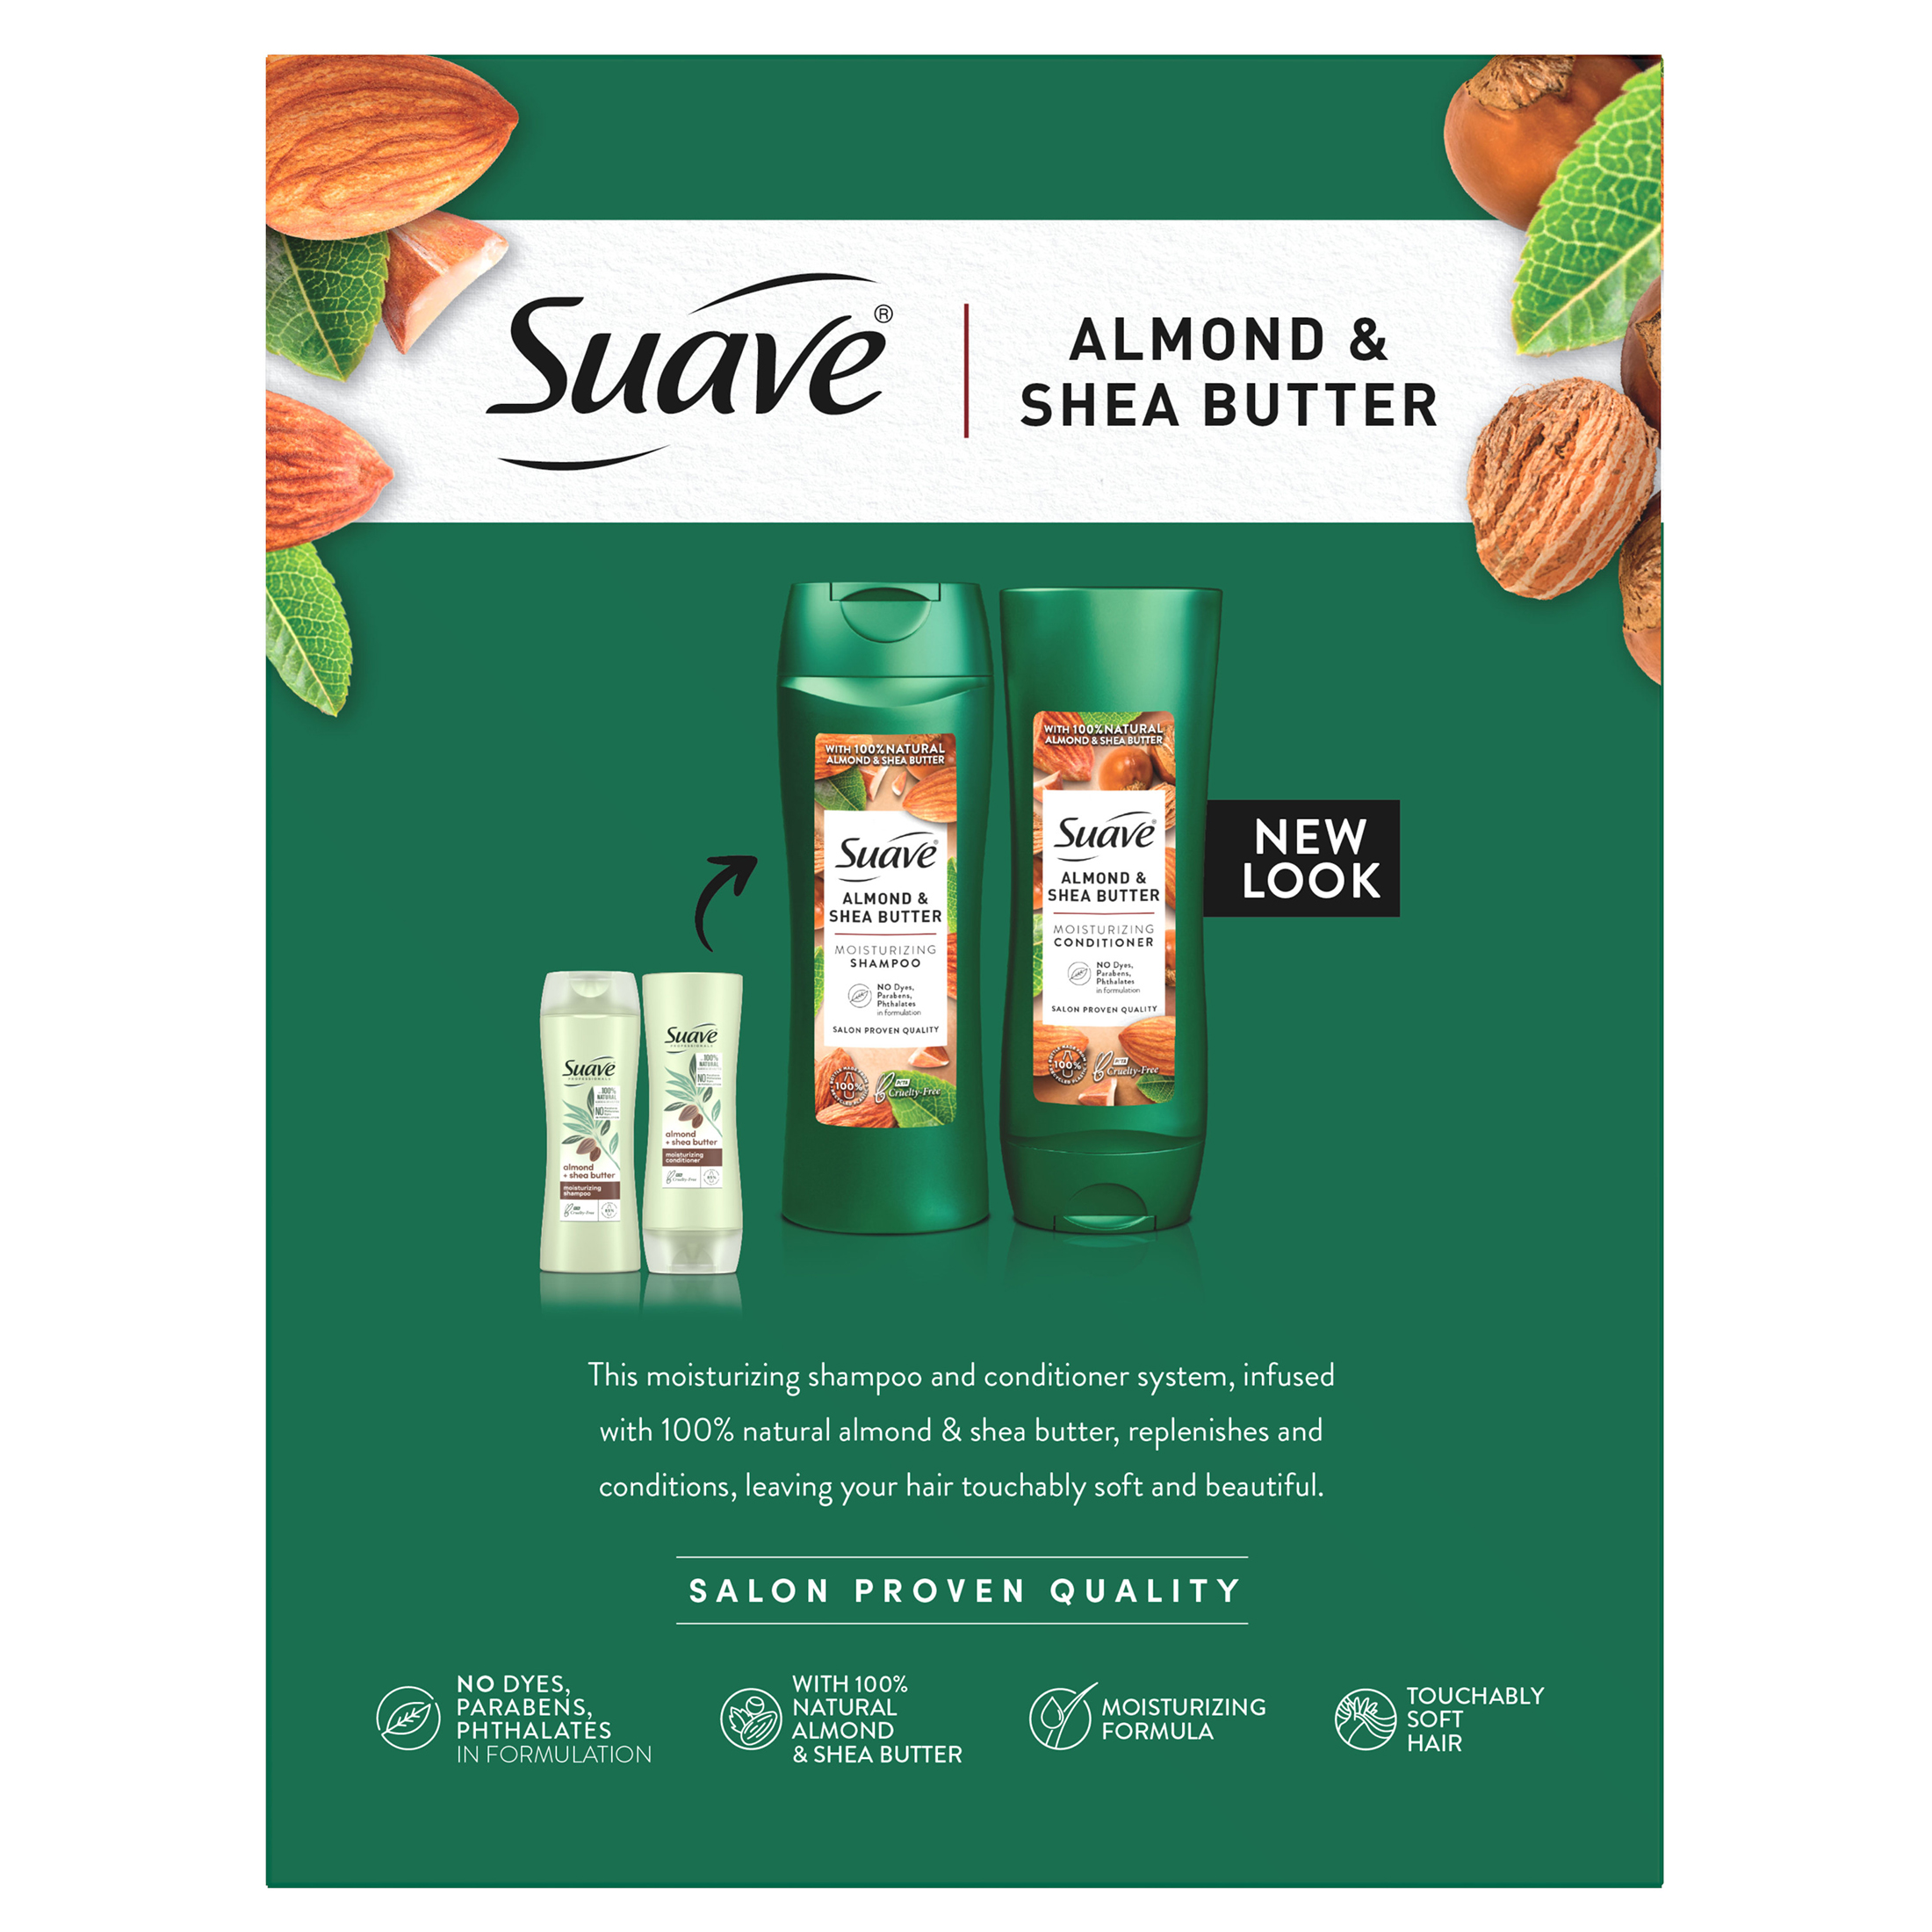 Suave Professionals Almond and Shea Butter Moisturizing Shampoo and Conditioner Paraben-free and Dye-free for Dry Hair 18 oz, 2 Count - image 5 of 13